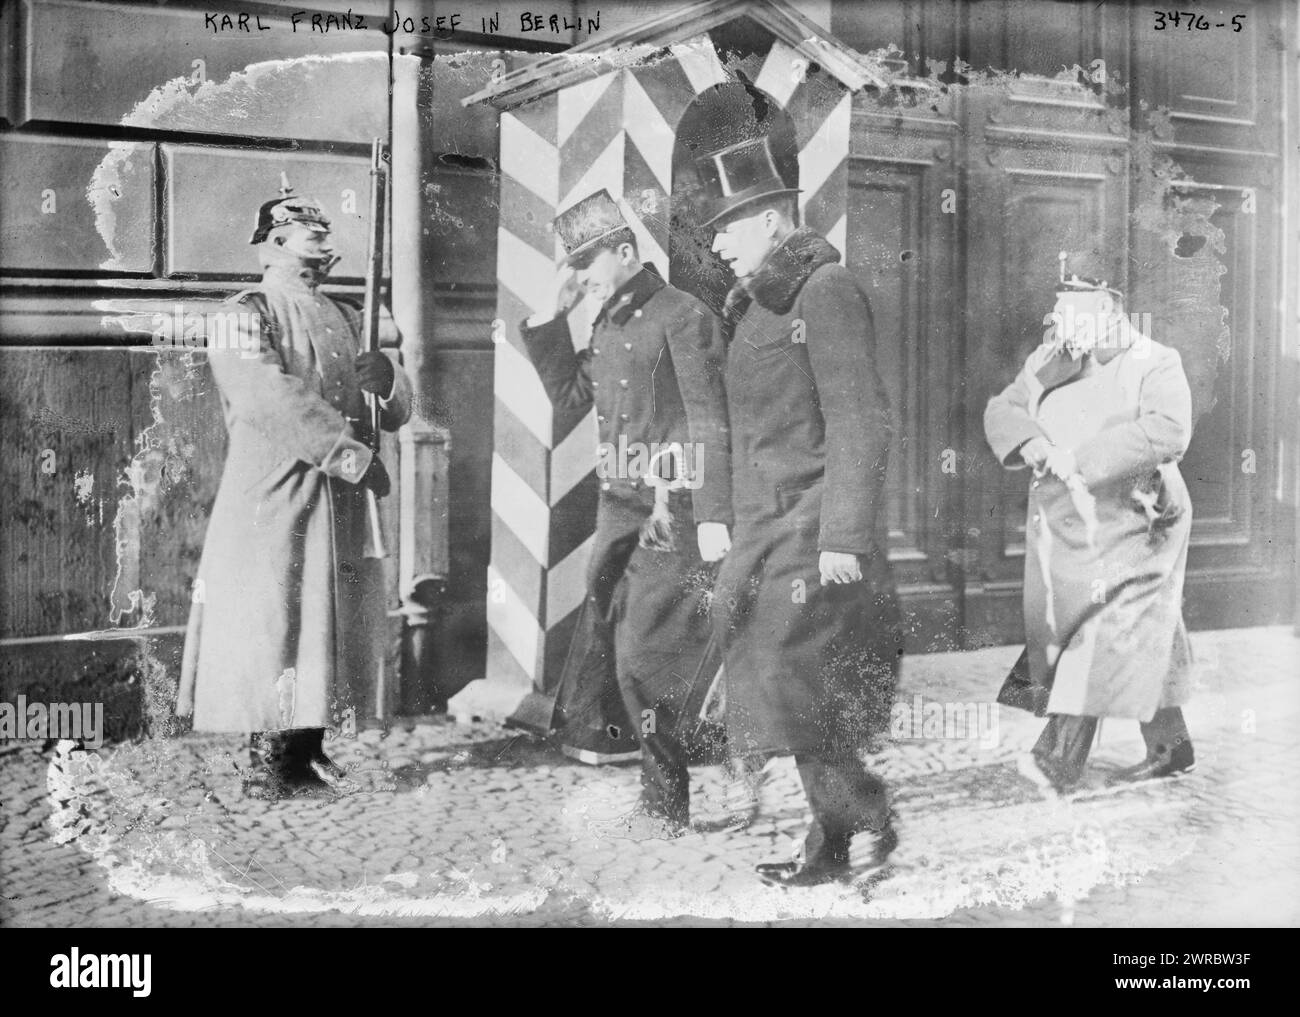 Karl Franz Josef in Berlin, Photograph shows Charles I of Austria, Charles Francis Joseph Louis Hubert George Otto Mary of Habsburg-Lorraine (1887-1922), the last ruler of the Austro-Hungarian Empire., between ca. 1910 and ca. 1915, Glass negatives, 1 negative: glass Stock Photo